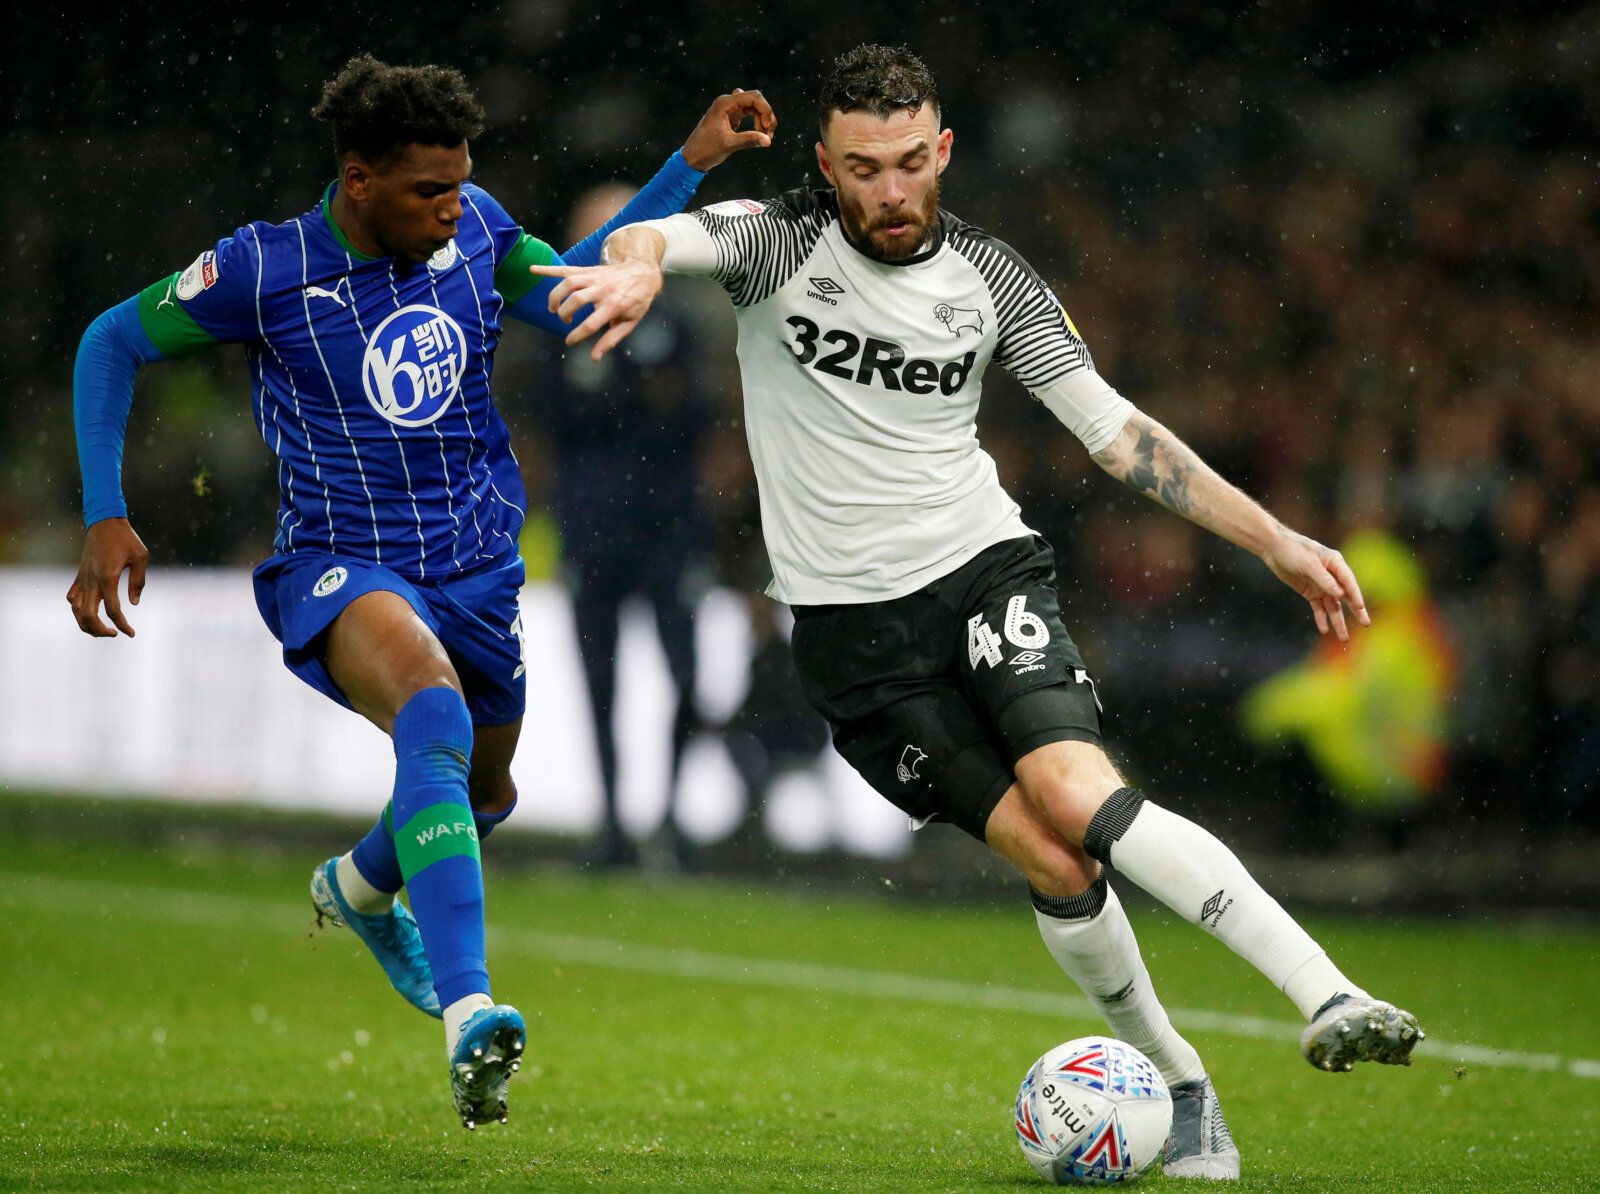 Soccer Football - Championship - Derby County v Wigan Athletic - Pride Park, Derby, Britain - October 23, 2019  Wigan Athletic's Dujon Sterling and Derby County's Scott Malone in action  Action Images/Ed Sykes  EDITORIAL USE ONLY. No use with unauthorized audio, video, data, fixture lists, club/league logos or 